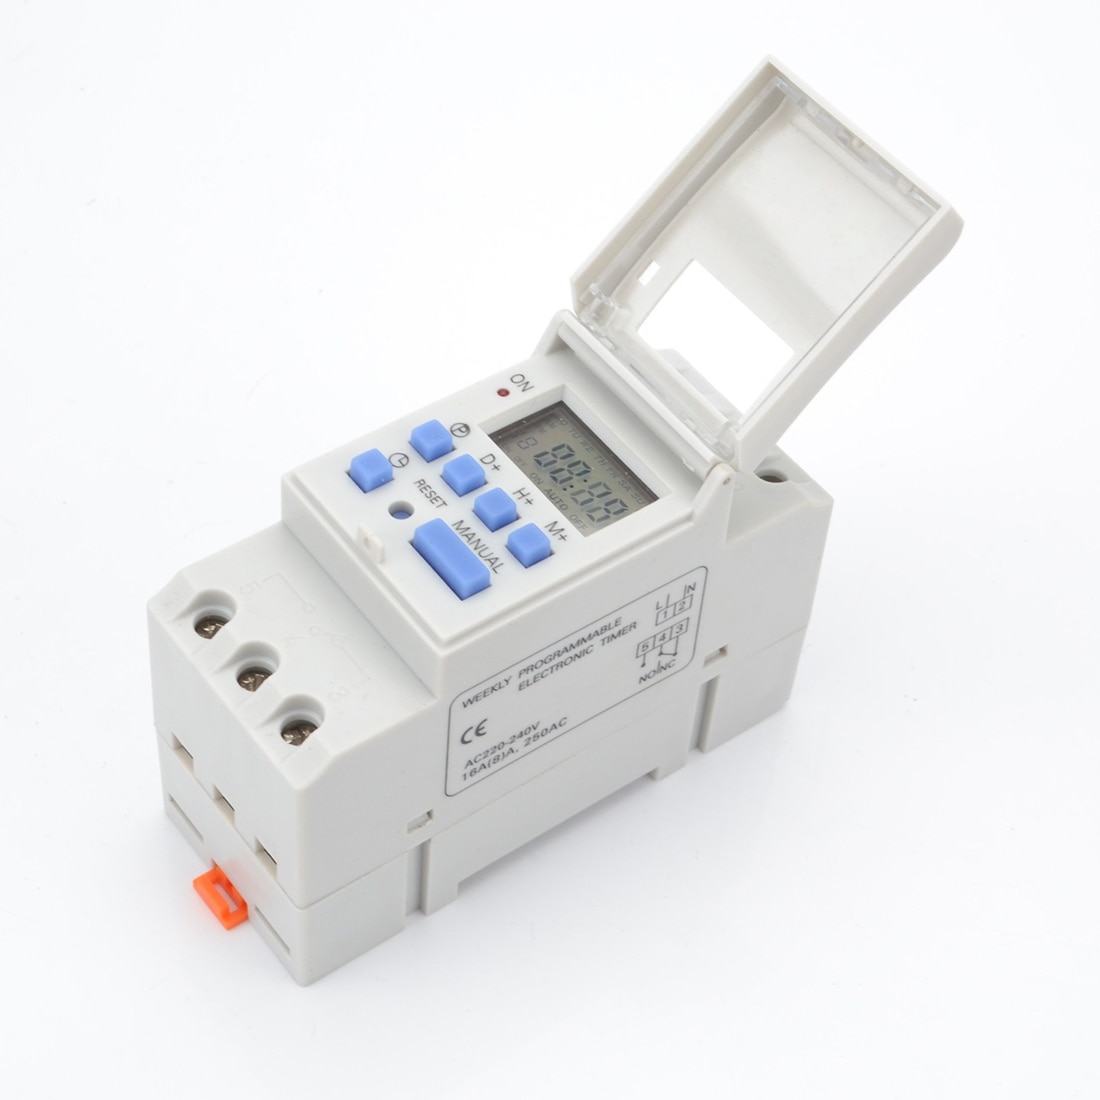 7 Days Programmable Digital Timer Switch Relay Control 220V 230V 6A 10A 16A 20A 25A 30A Electronic Weekly